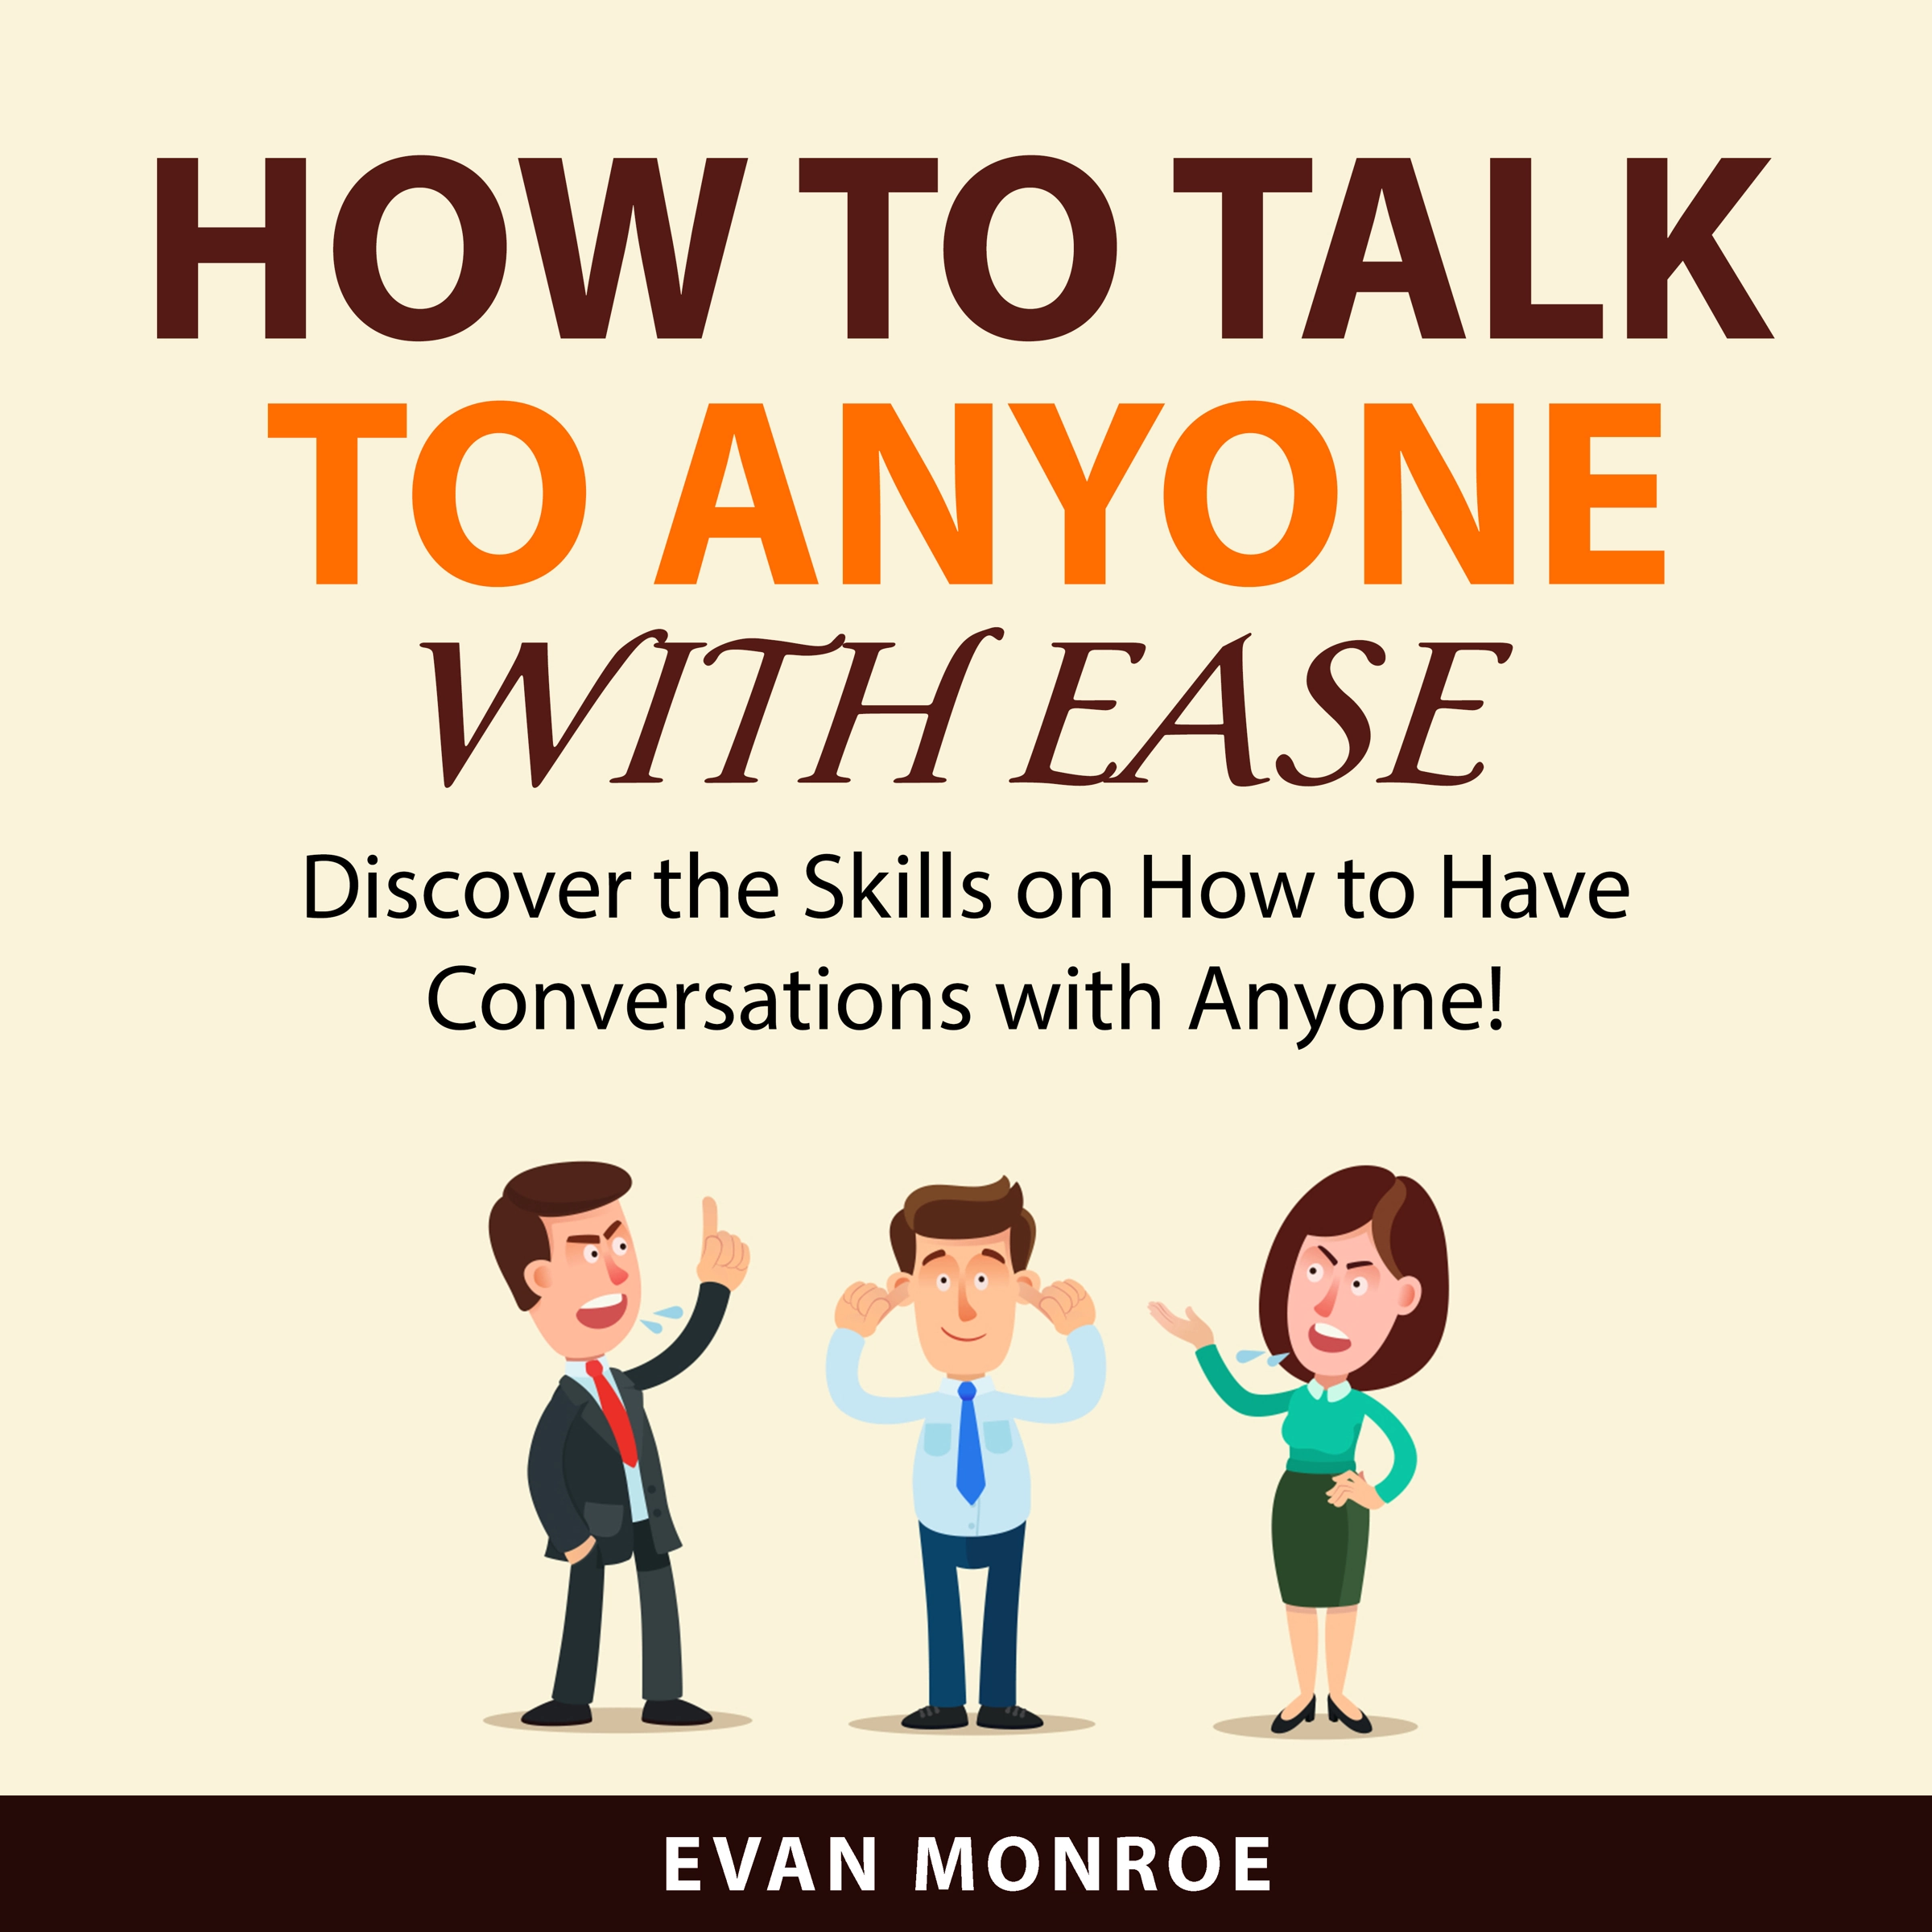 How to Talk to Anyone With Ease Audiobook by Evan Monroe